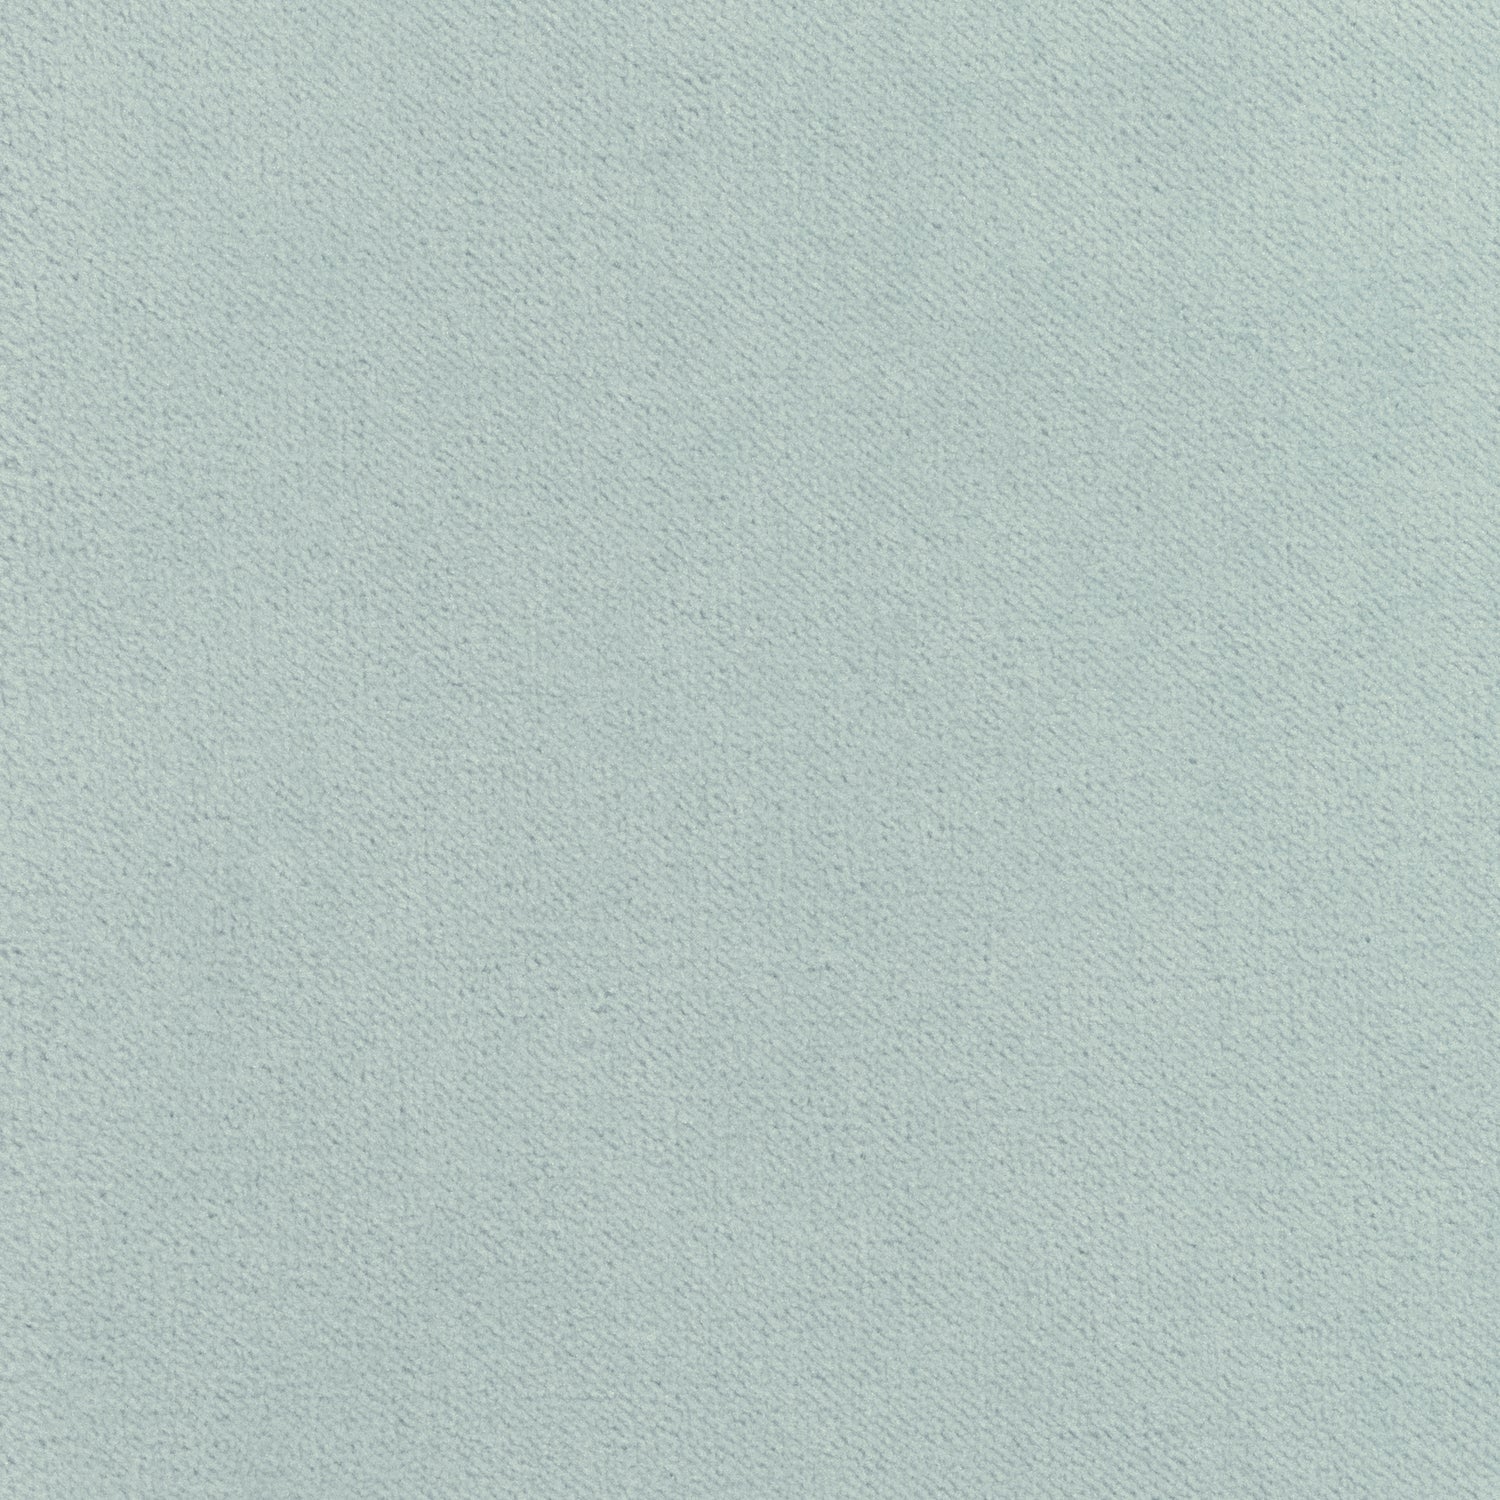 Club Velvet fabric in glacier color - pattern number W7245 - by Thibaut in the Club Velvet collection